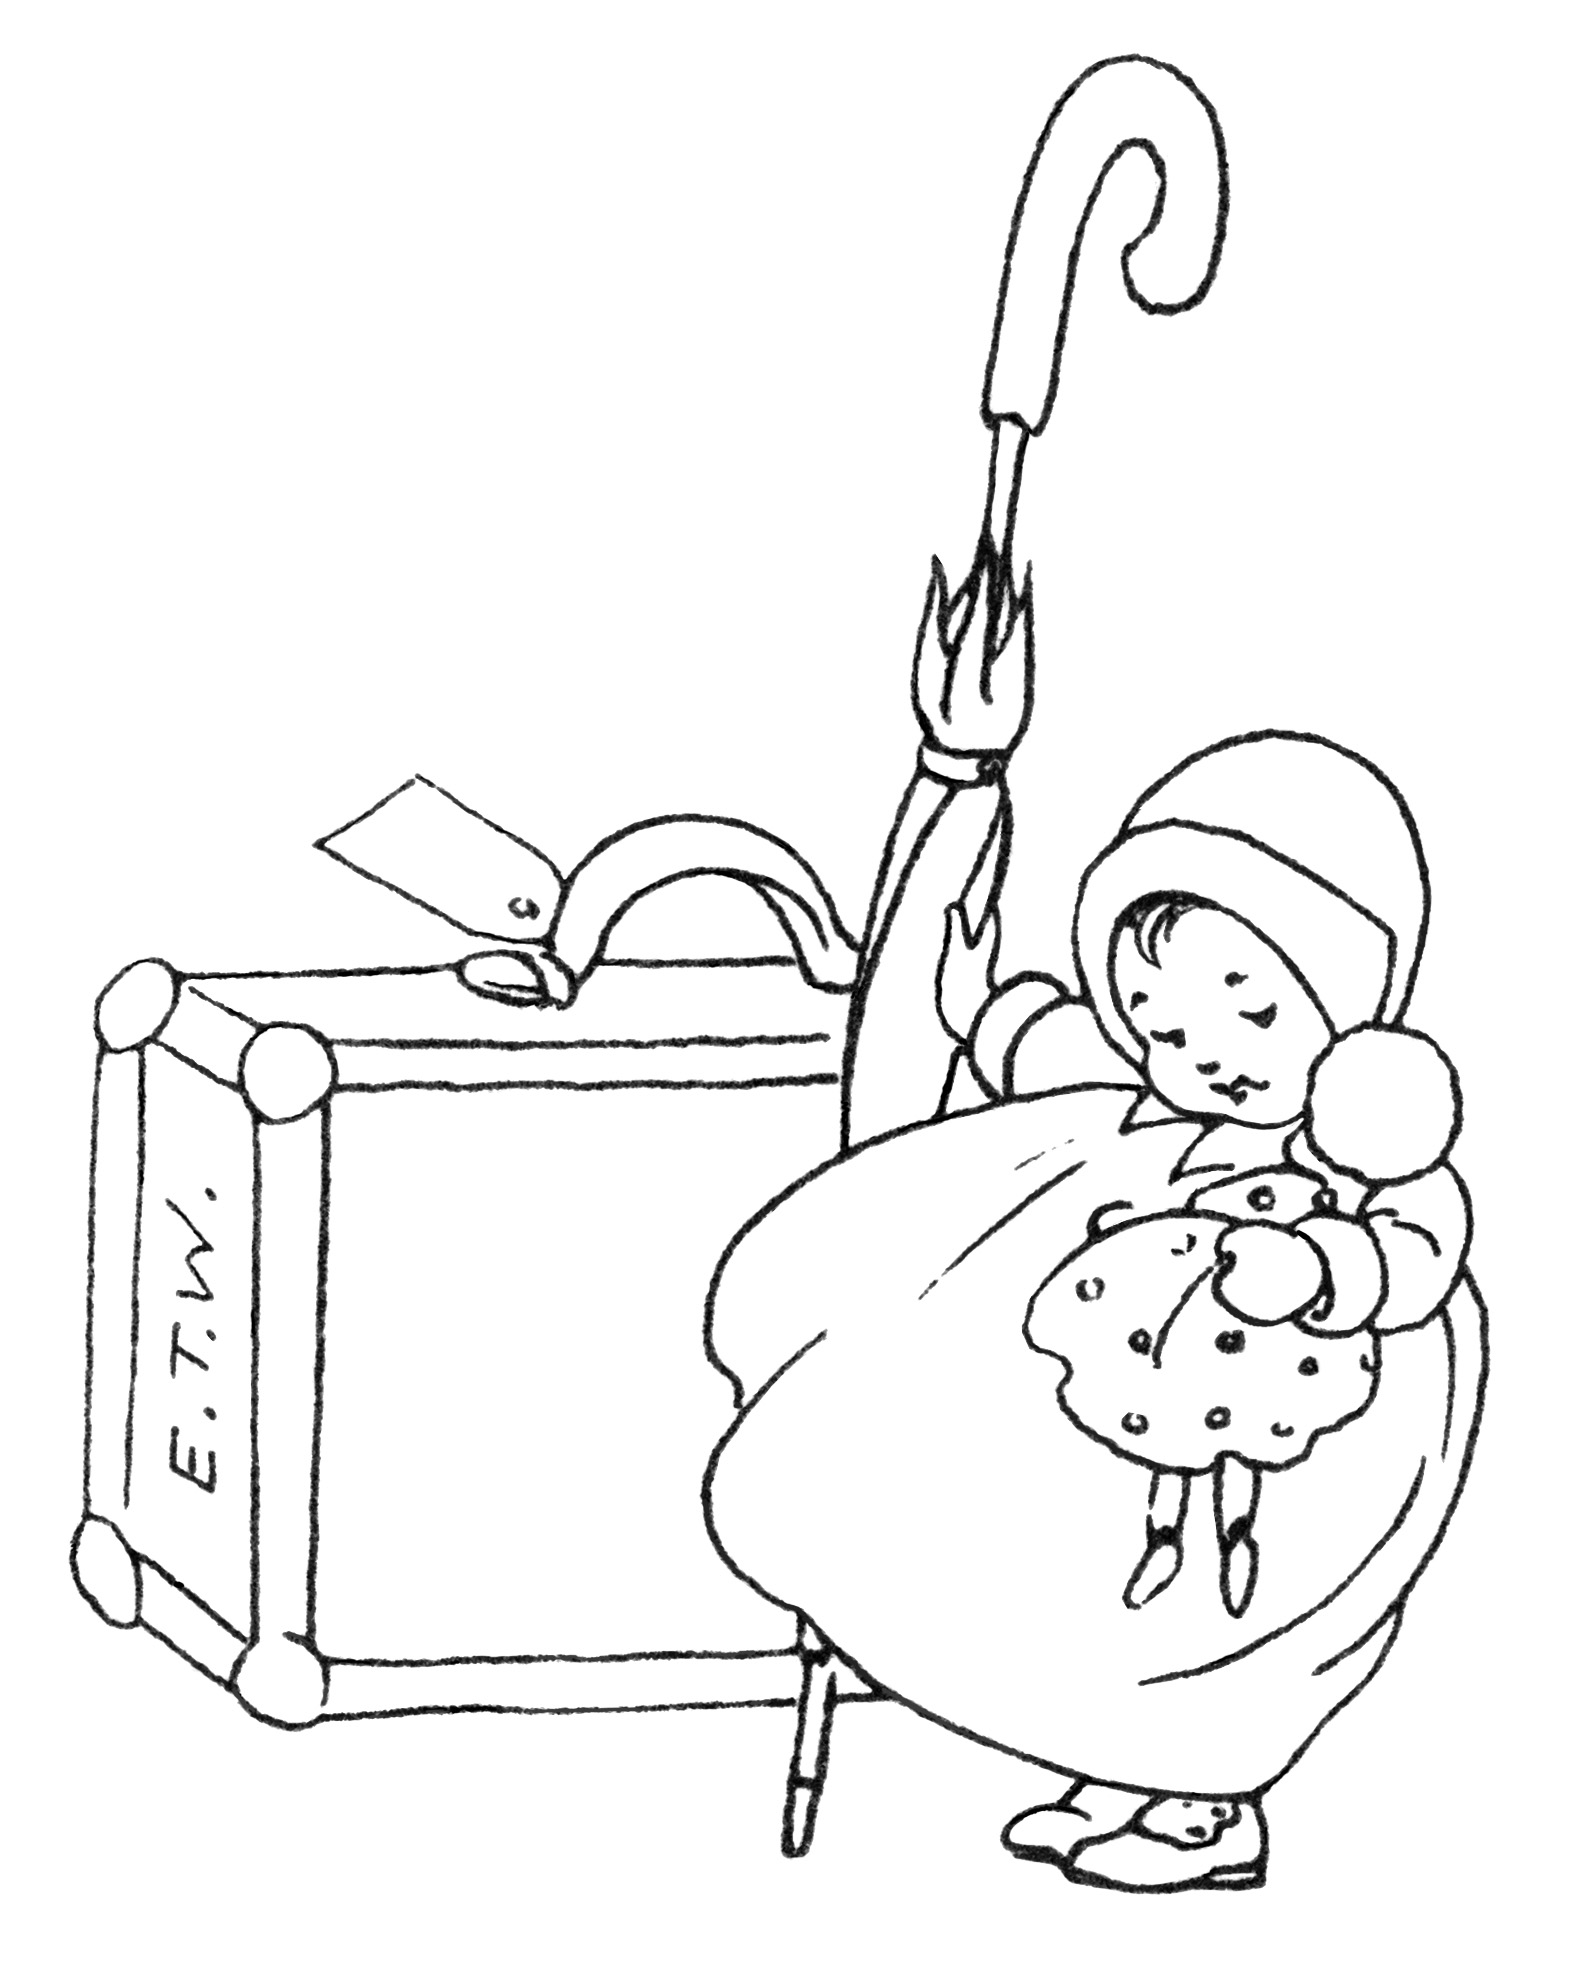 vintage baby clip art, black and white clipart, baby's little journey, baby book illustration, baby with doll and suitcase